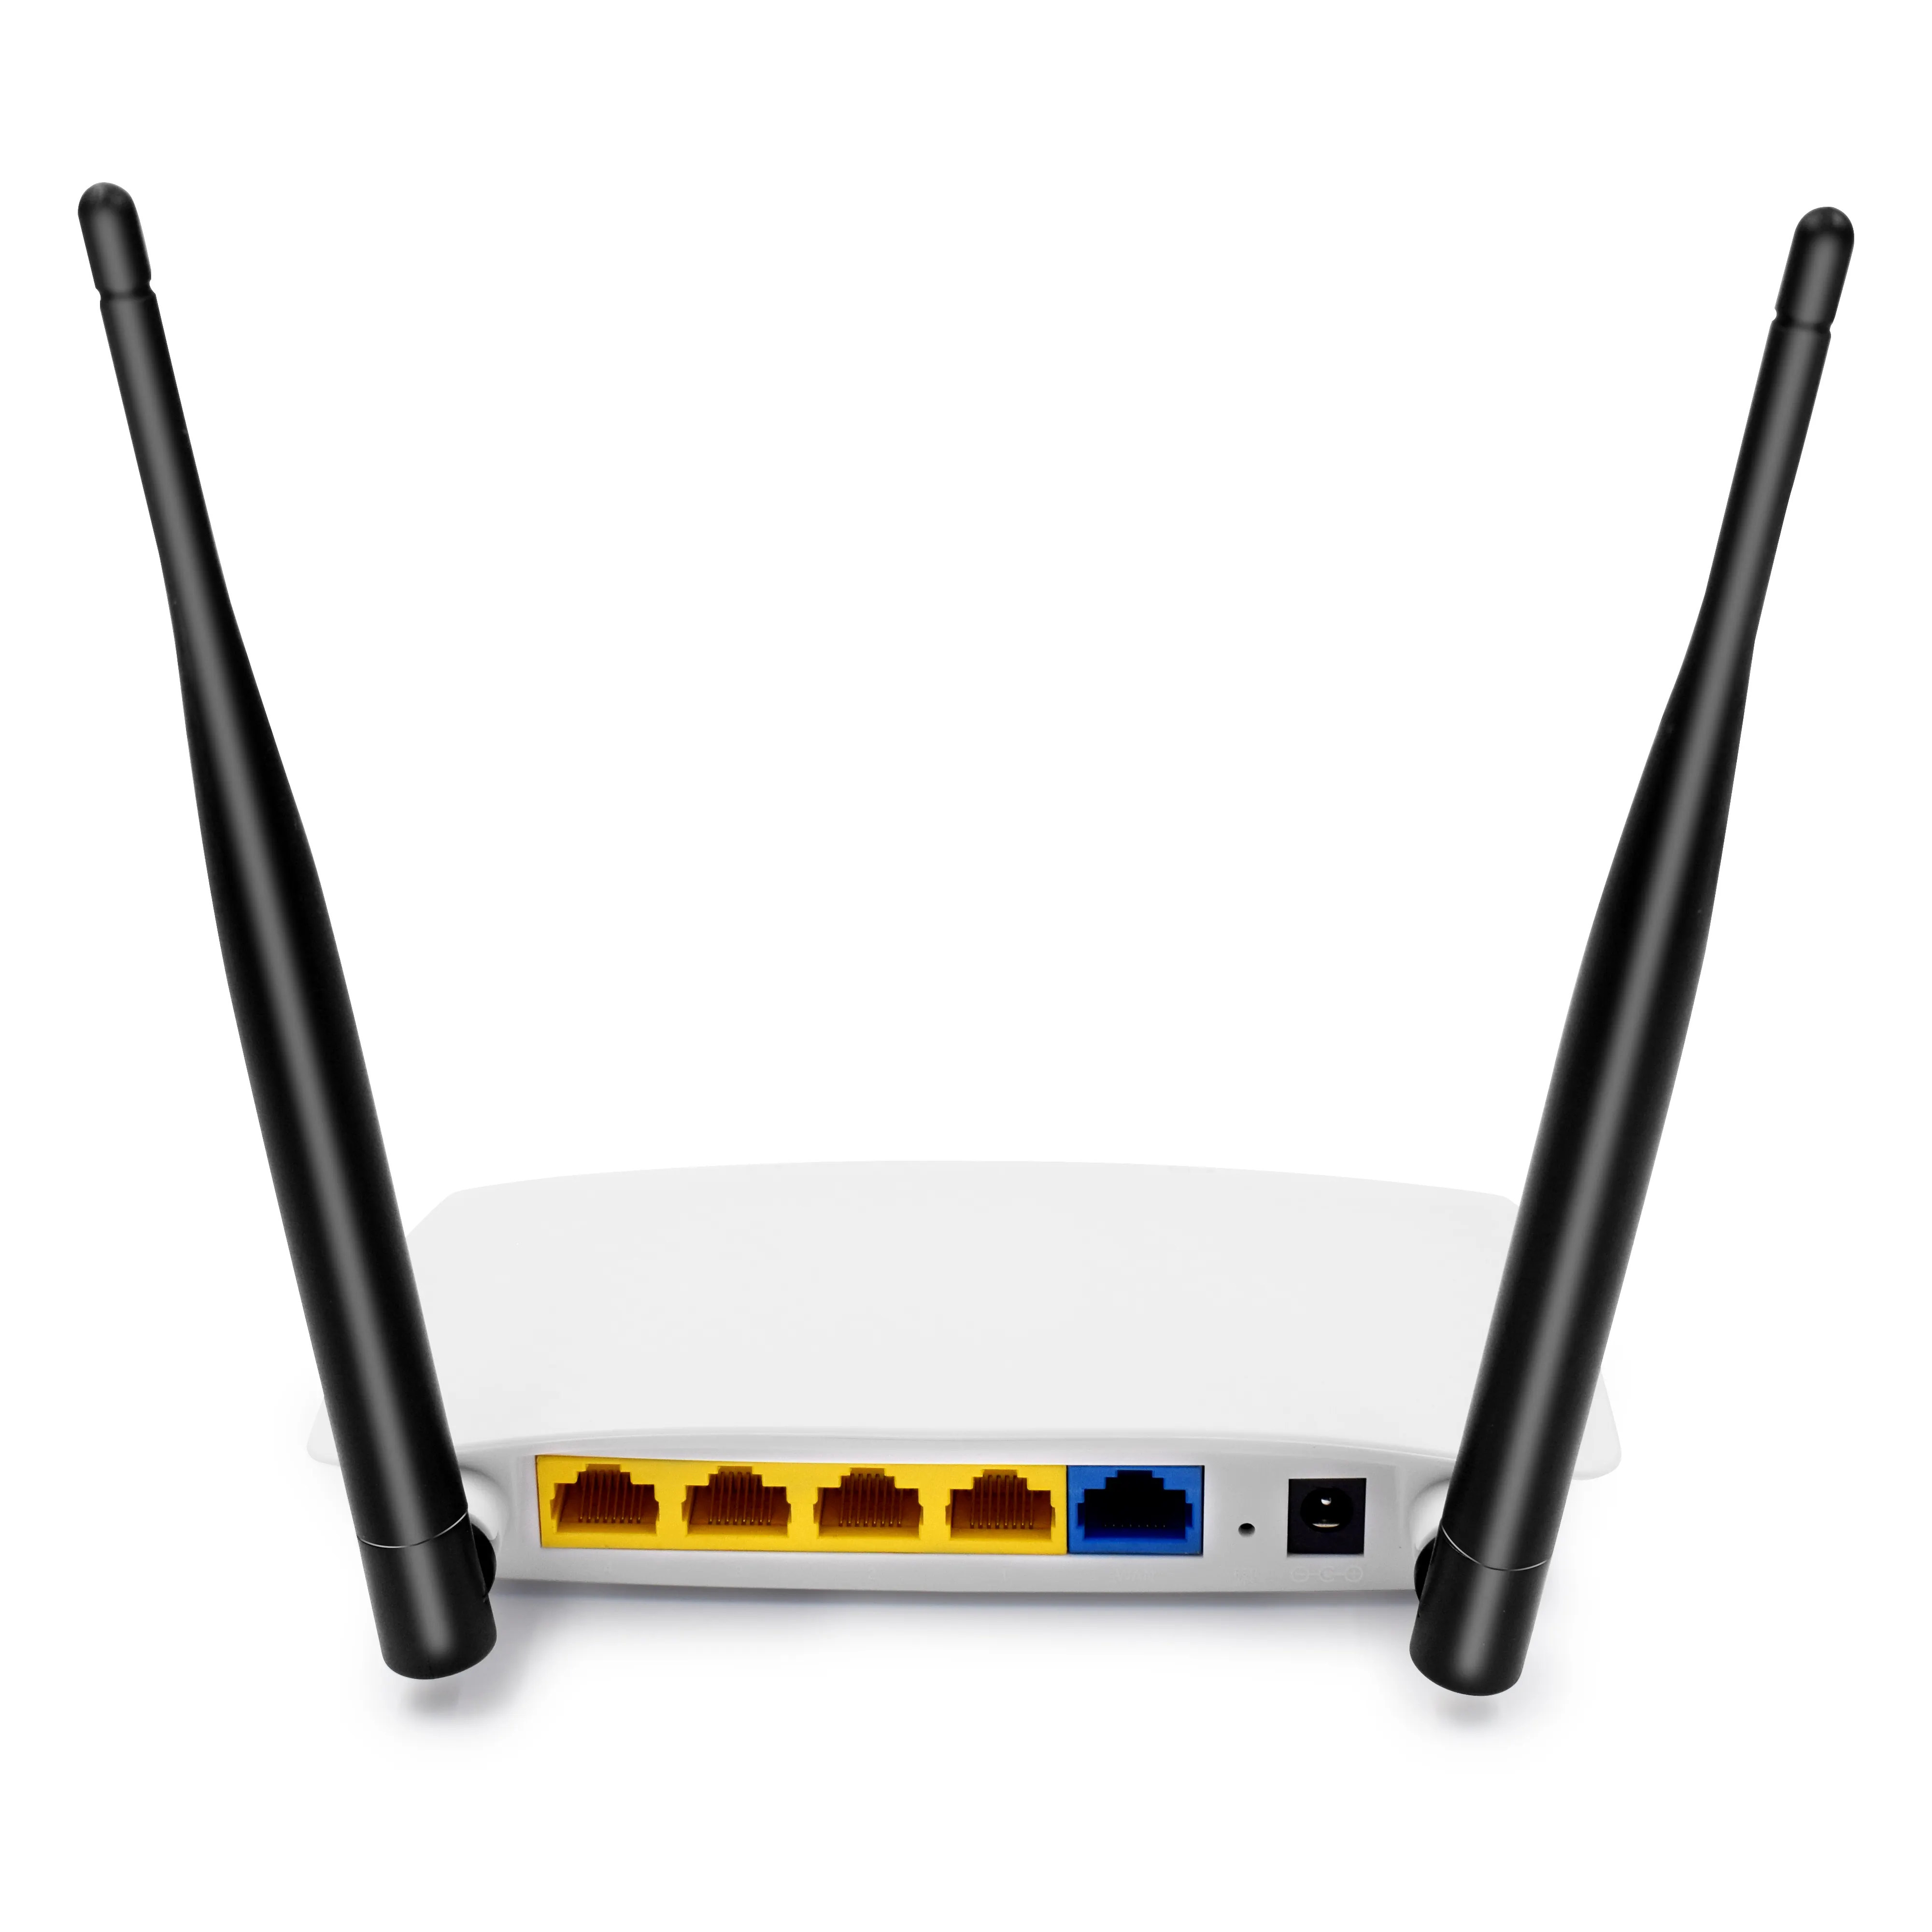 wifi router wireless 300mbps Openwrt router wifi 300mbps openwrt 3g 4g with 2 External 5dbi Antenna 300mbps openwrt router